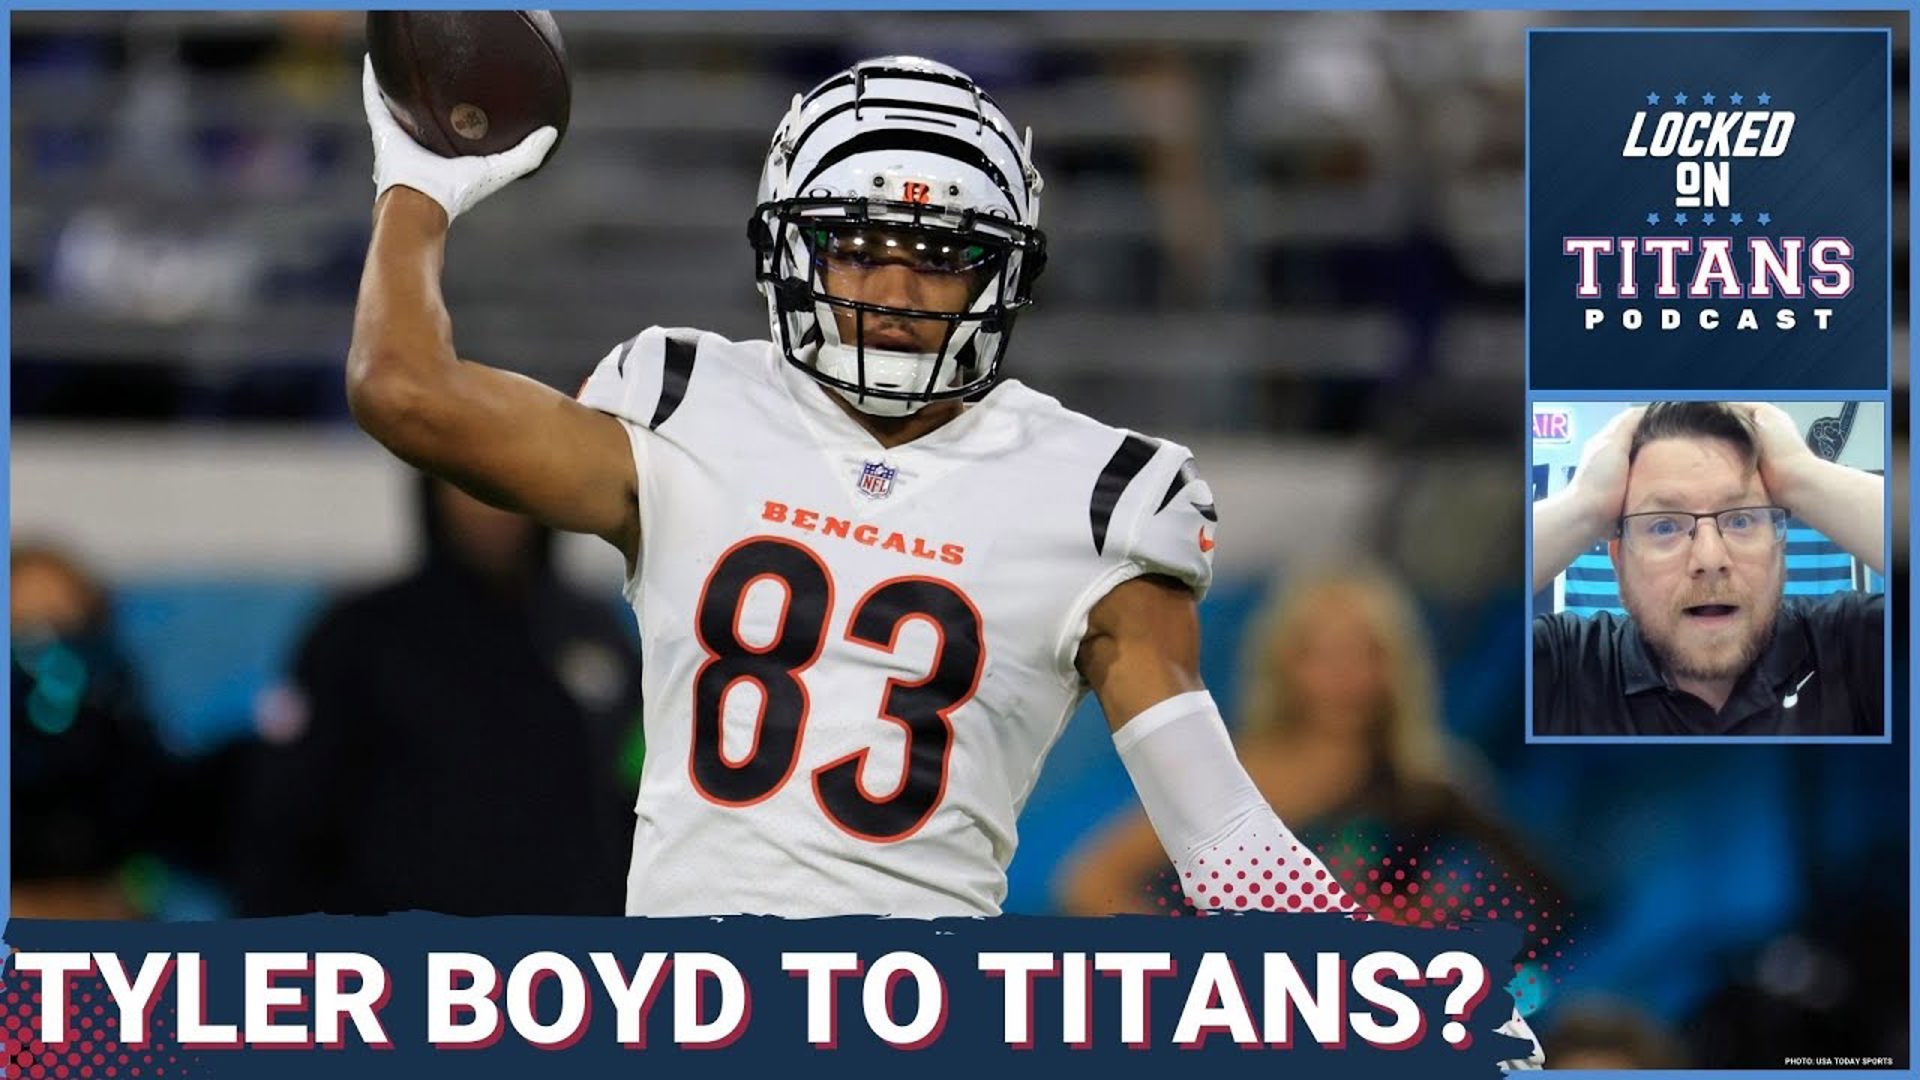 The Tennessee Titans look like they will be signing Tyler Boyd and the wide receiver immediately would become the third best receiver on the team